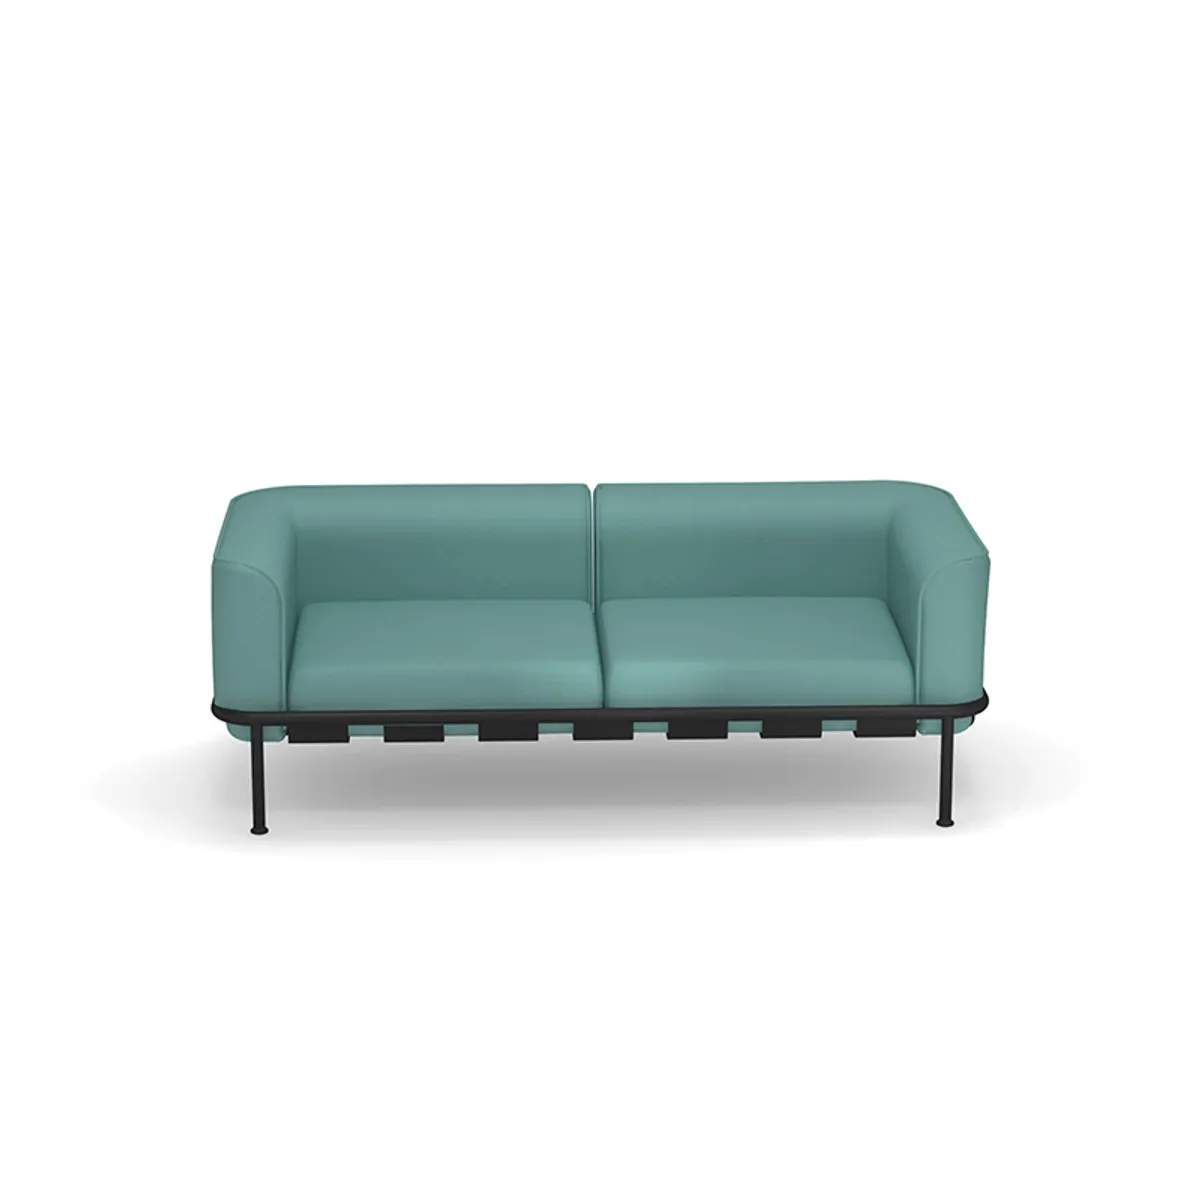 Dock 2 Seater Sofa 24 4 Outdoor Use Inside Out Contracst